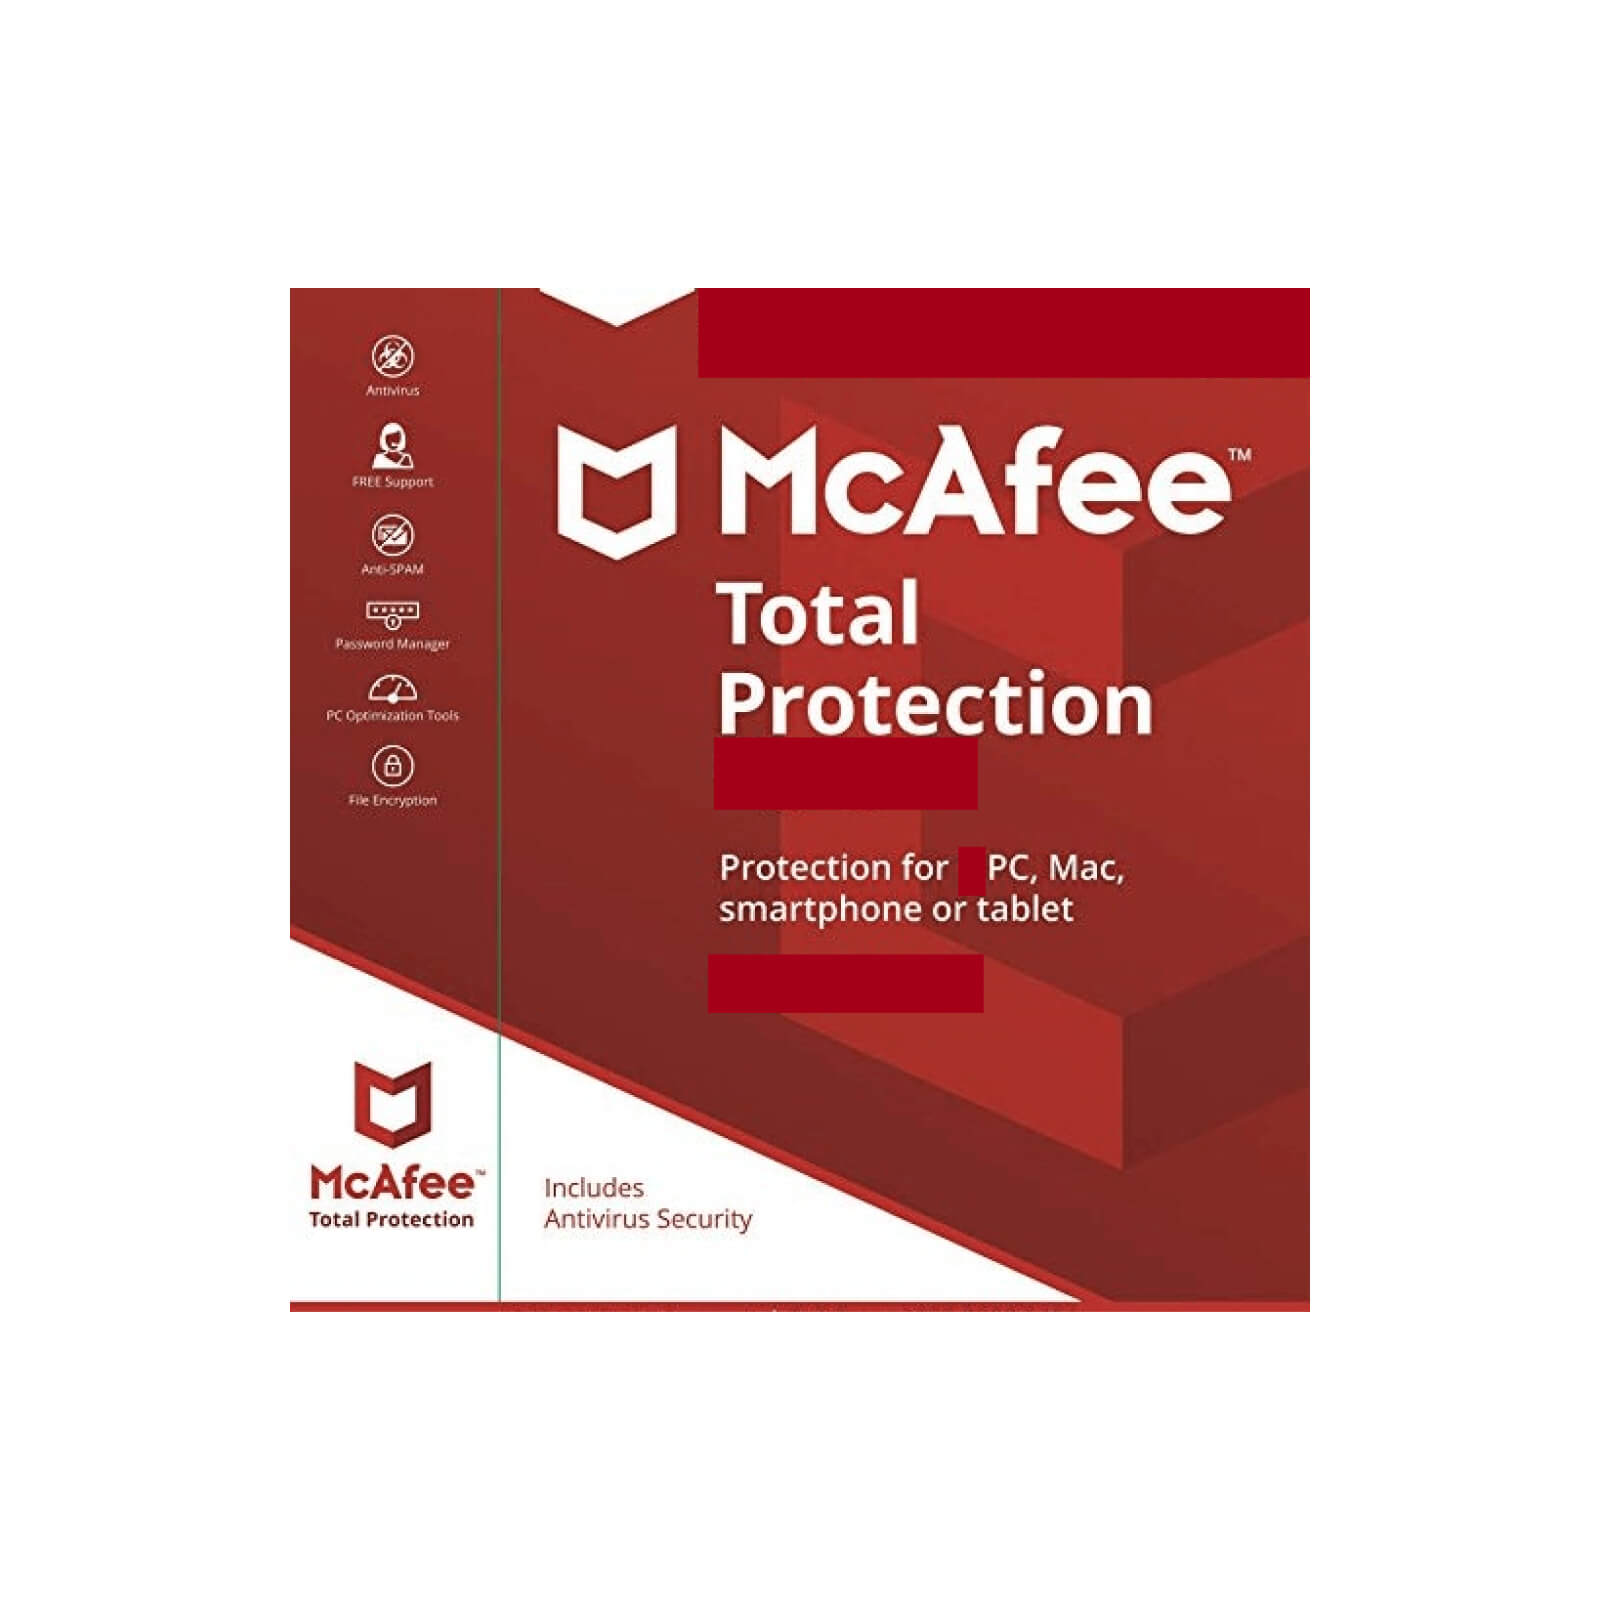 mcafee total protection best price